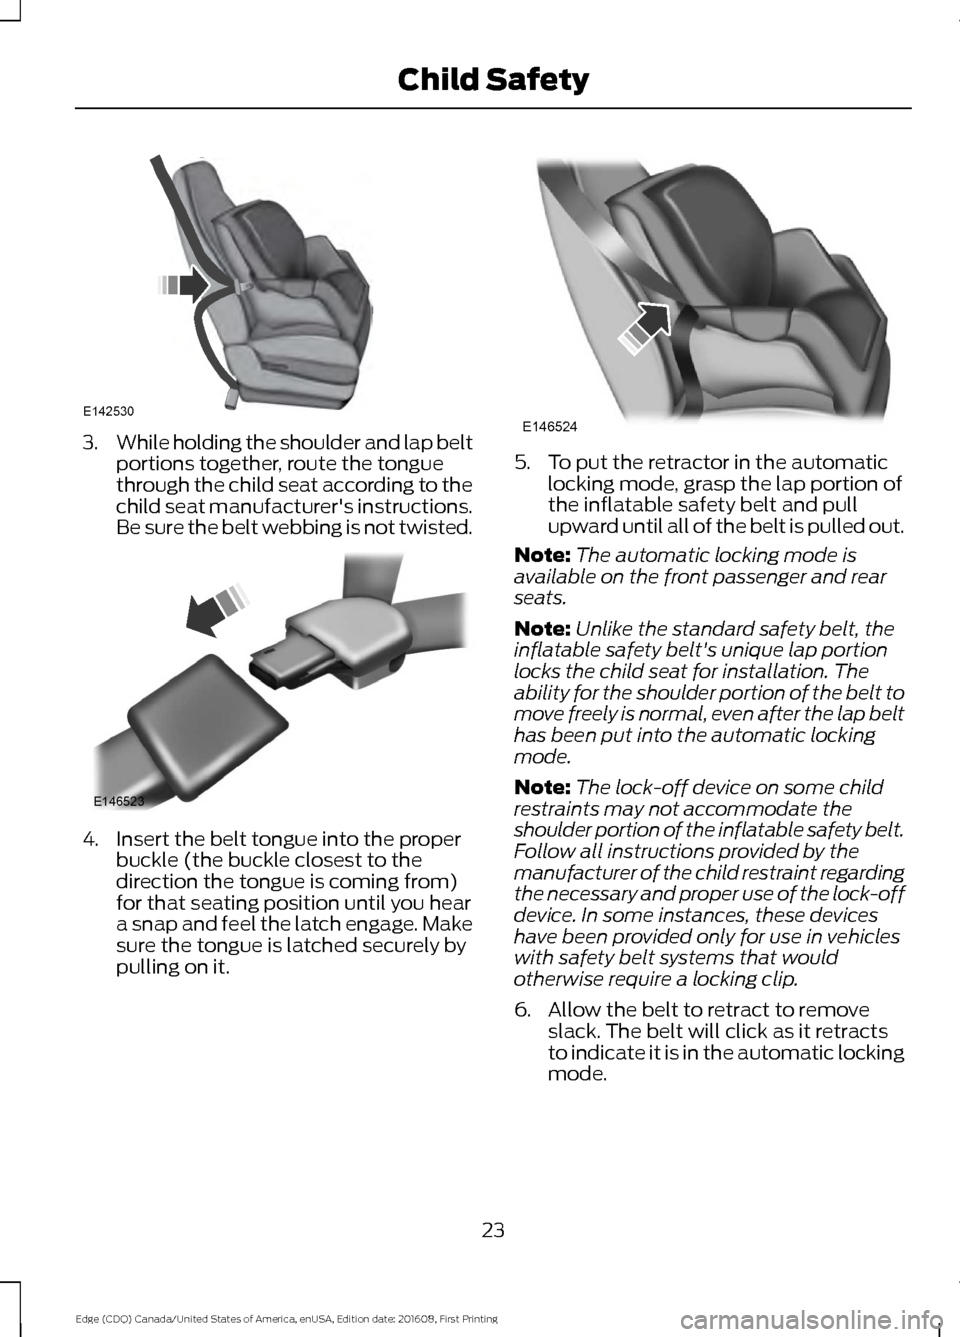 FORD EDGE 2017 2.G Owners Manual 3.
While holding the shoulder and lap belt
portions together, route the tongue
through the child seat according to the
child seat manufacturers instructions.
Be sure the belt webbing is not twisted. 